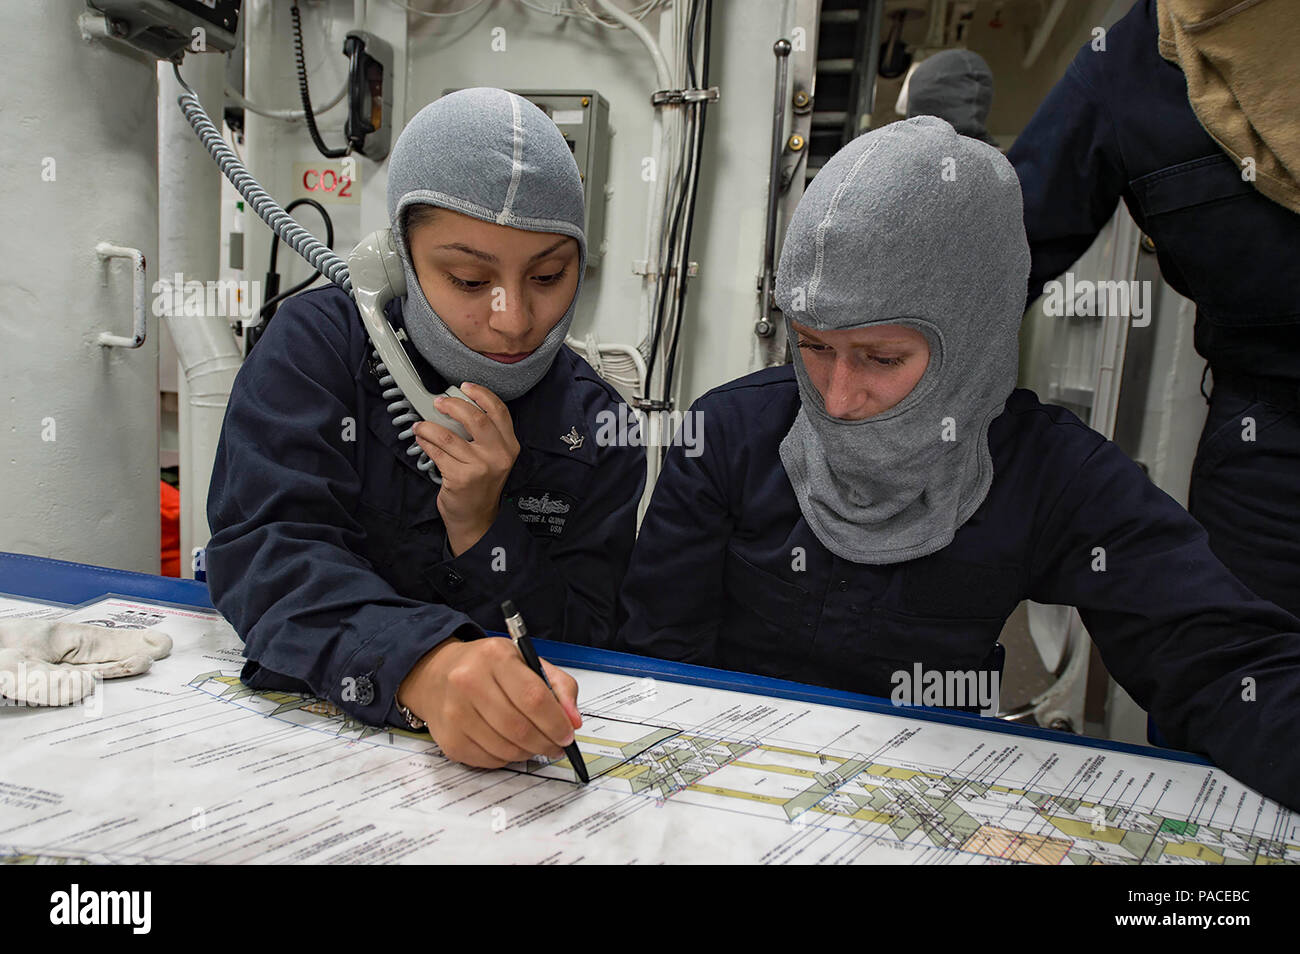 160311-N-MD297-088 PACIFIC OCEAN (March 11, 2016) - Yeoman Seaman Christine Quinn, left, and Gas Turbine Systems Technician (Mechanical) Fireman Dickie updates a damage control chart during a main space fire drill aboard the Arleigh Burke-class guided-missile destroyer USS Lassen (DDG 82). Lassen is deployed to the U.S. 4th Fleet area of responsibility supporting law enforcement operations as part of Operation Martillo. (U.S. Navy photo by Mass Communication Specialist 2nd Class Huey D. Younger Jr./Released) Stock Photo